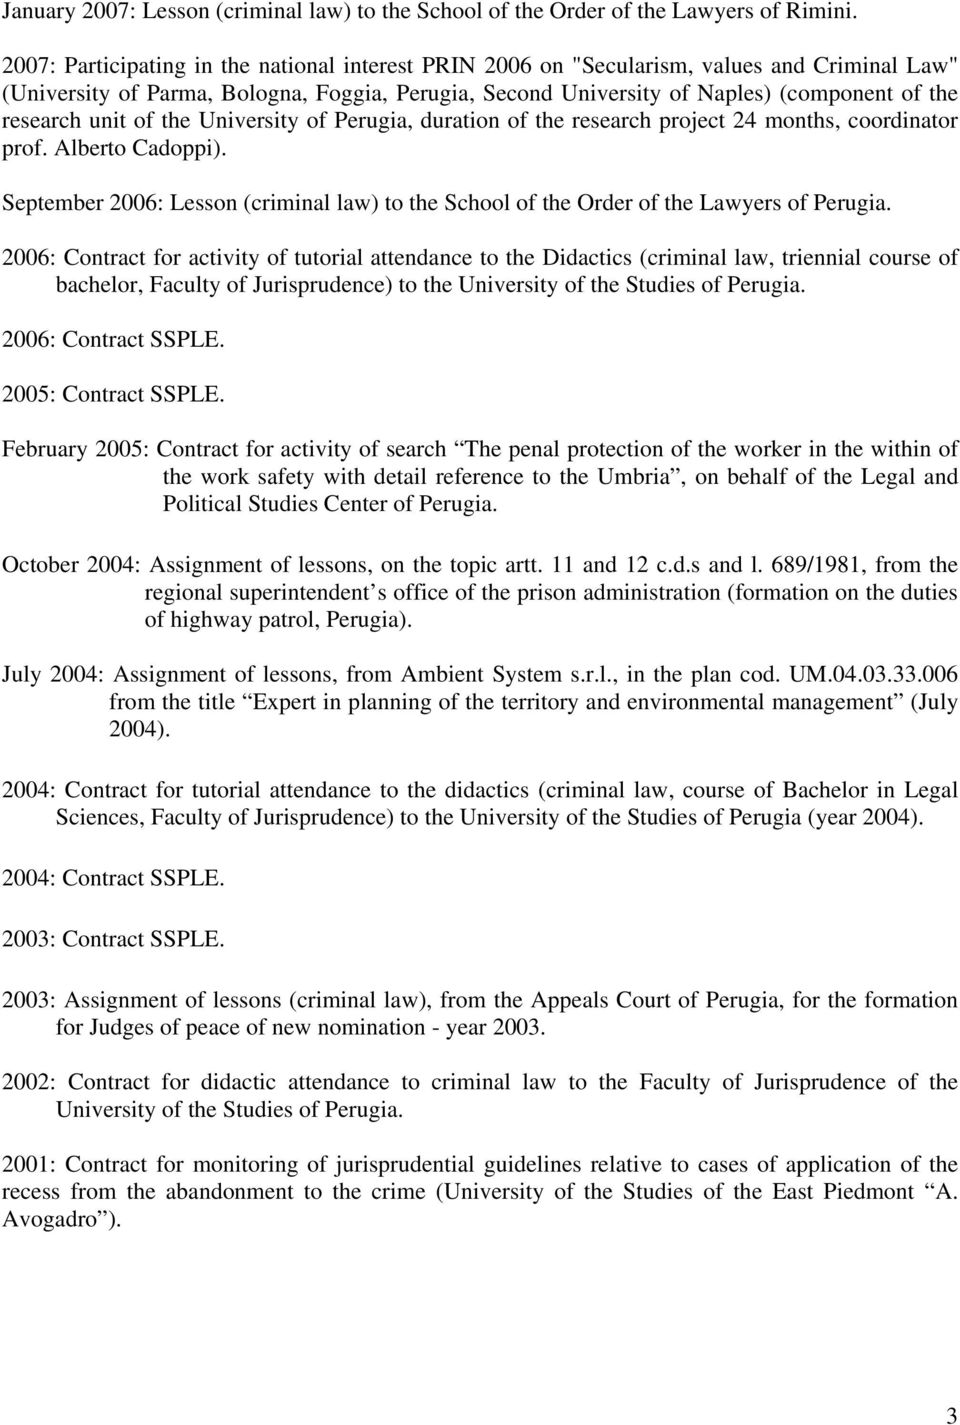 unit of the University of Perugia, duration of the research project 24 months, coordinator prof. Alberto Cadoppi).